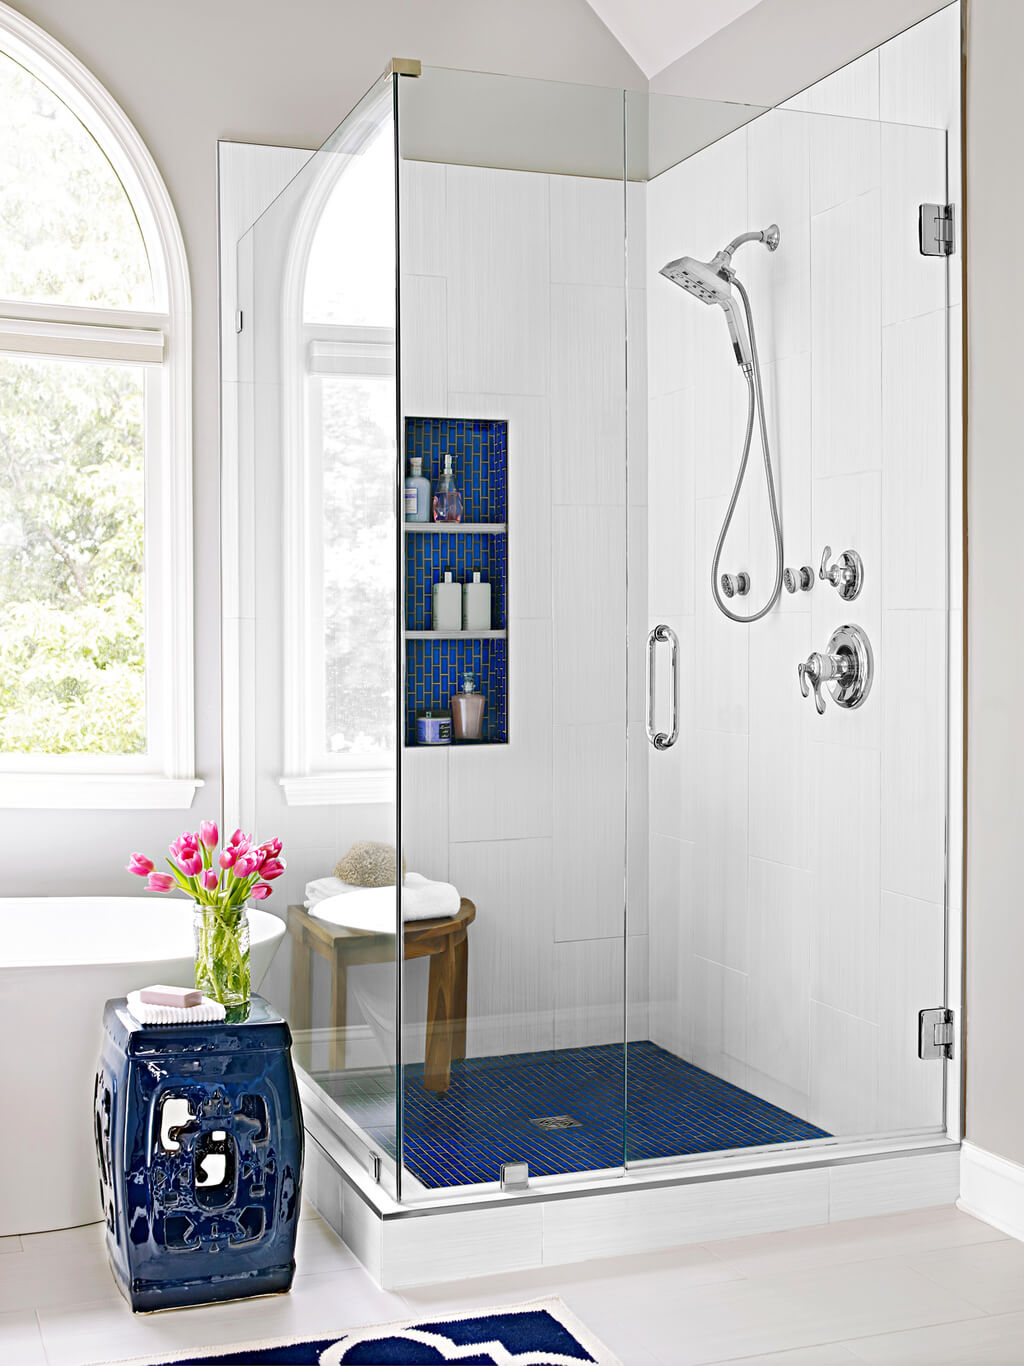 master bathroom dimensions: Traditional Style Walk-in Shower